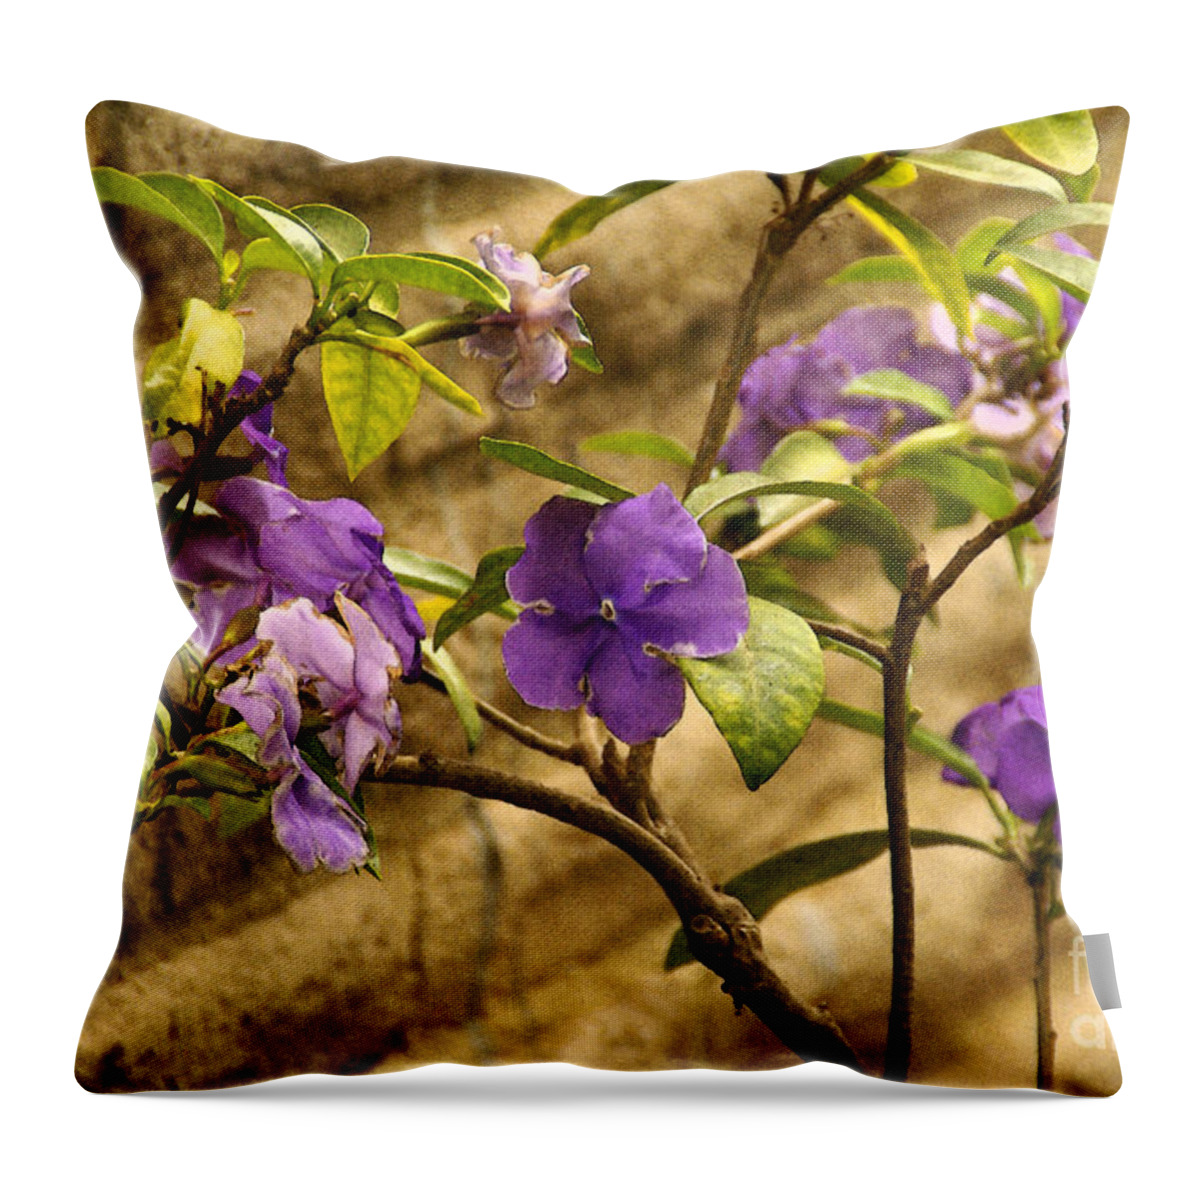 Adobe-wall Throw Pillow featuring the photograph Adobe Garden Wall by Linda Shafer